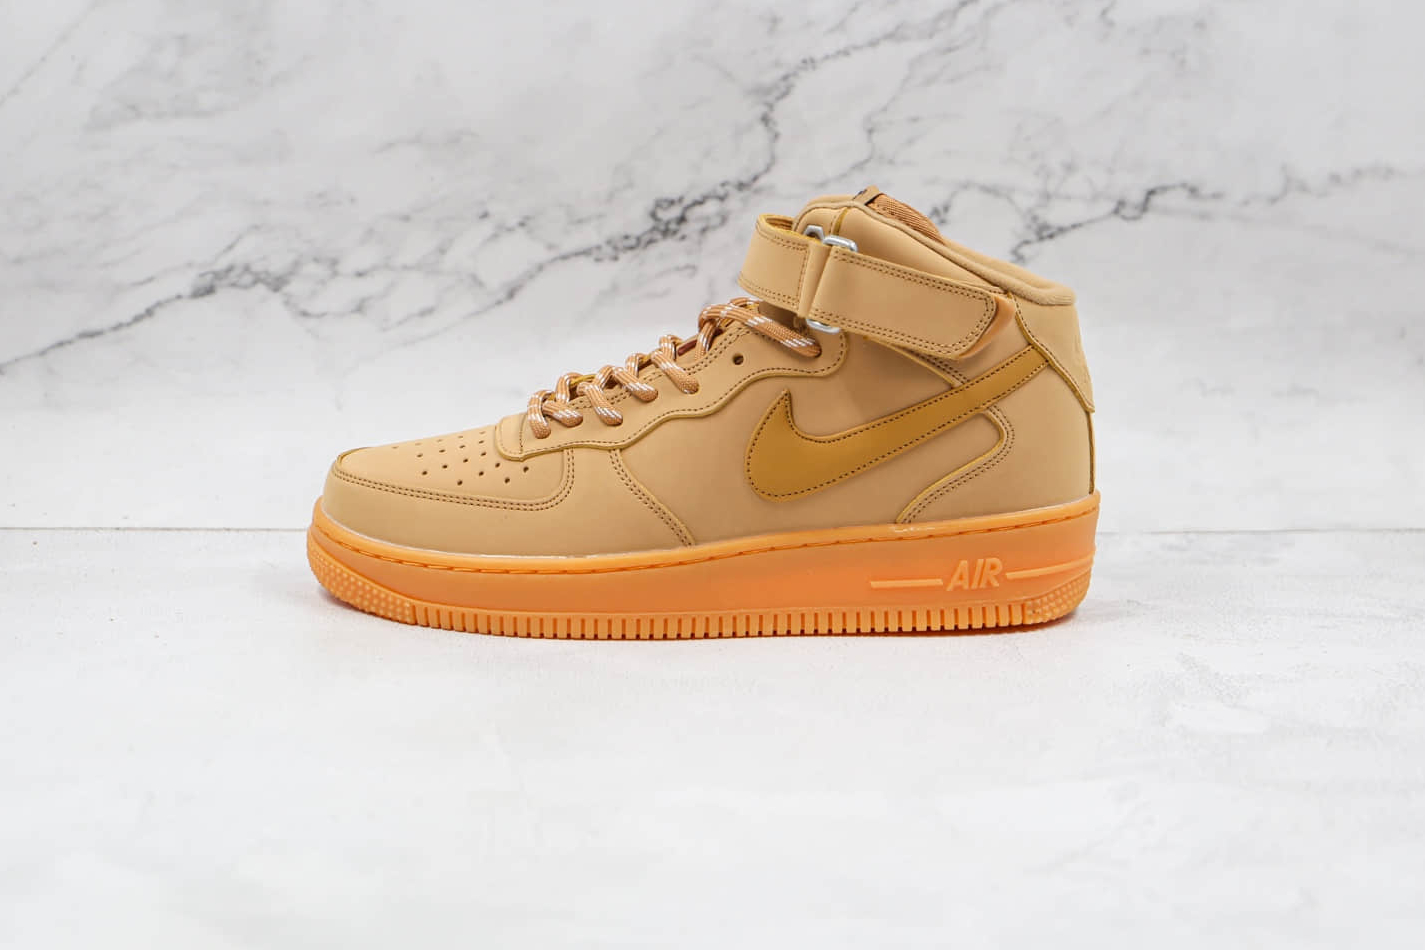 Nike Air Force 1 Mid '07 'Flax' DJ9158-200 | Shop the Iconic Sneaker